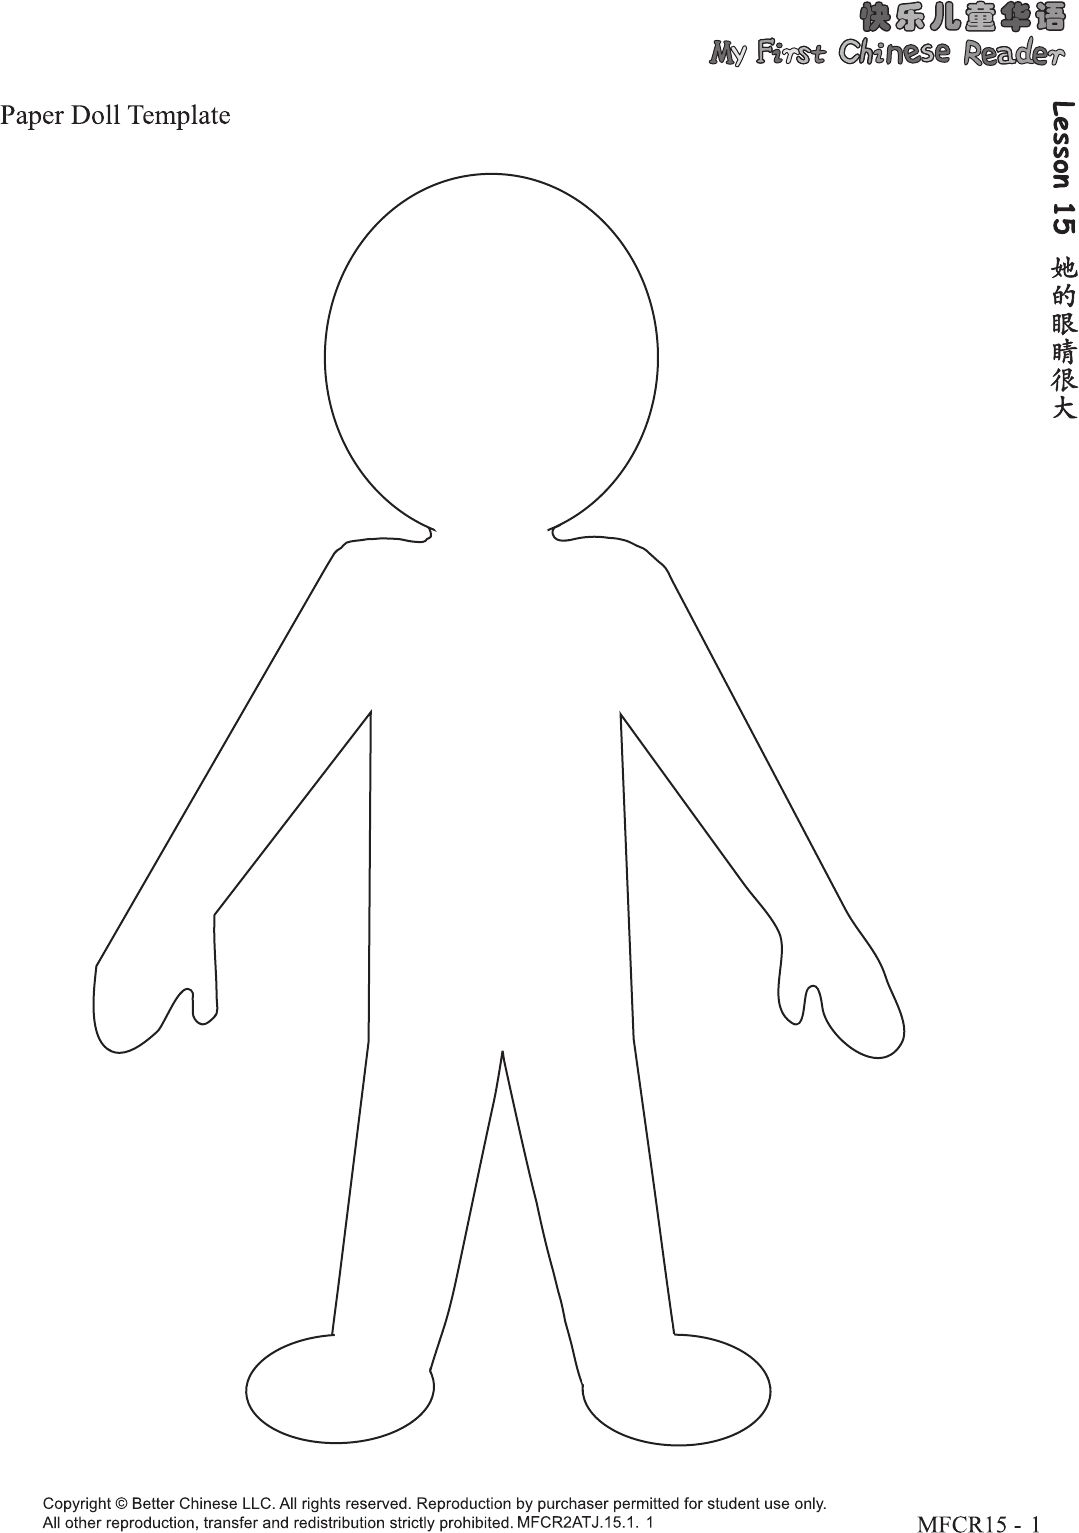 free-paper-doll-template-printable-templates